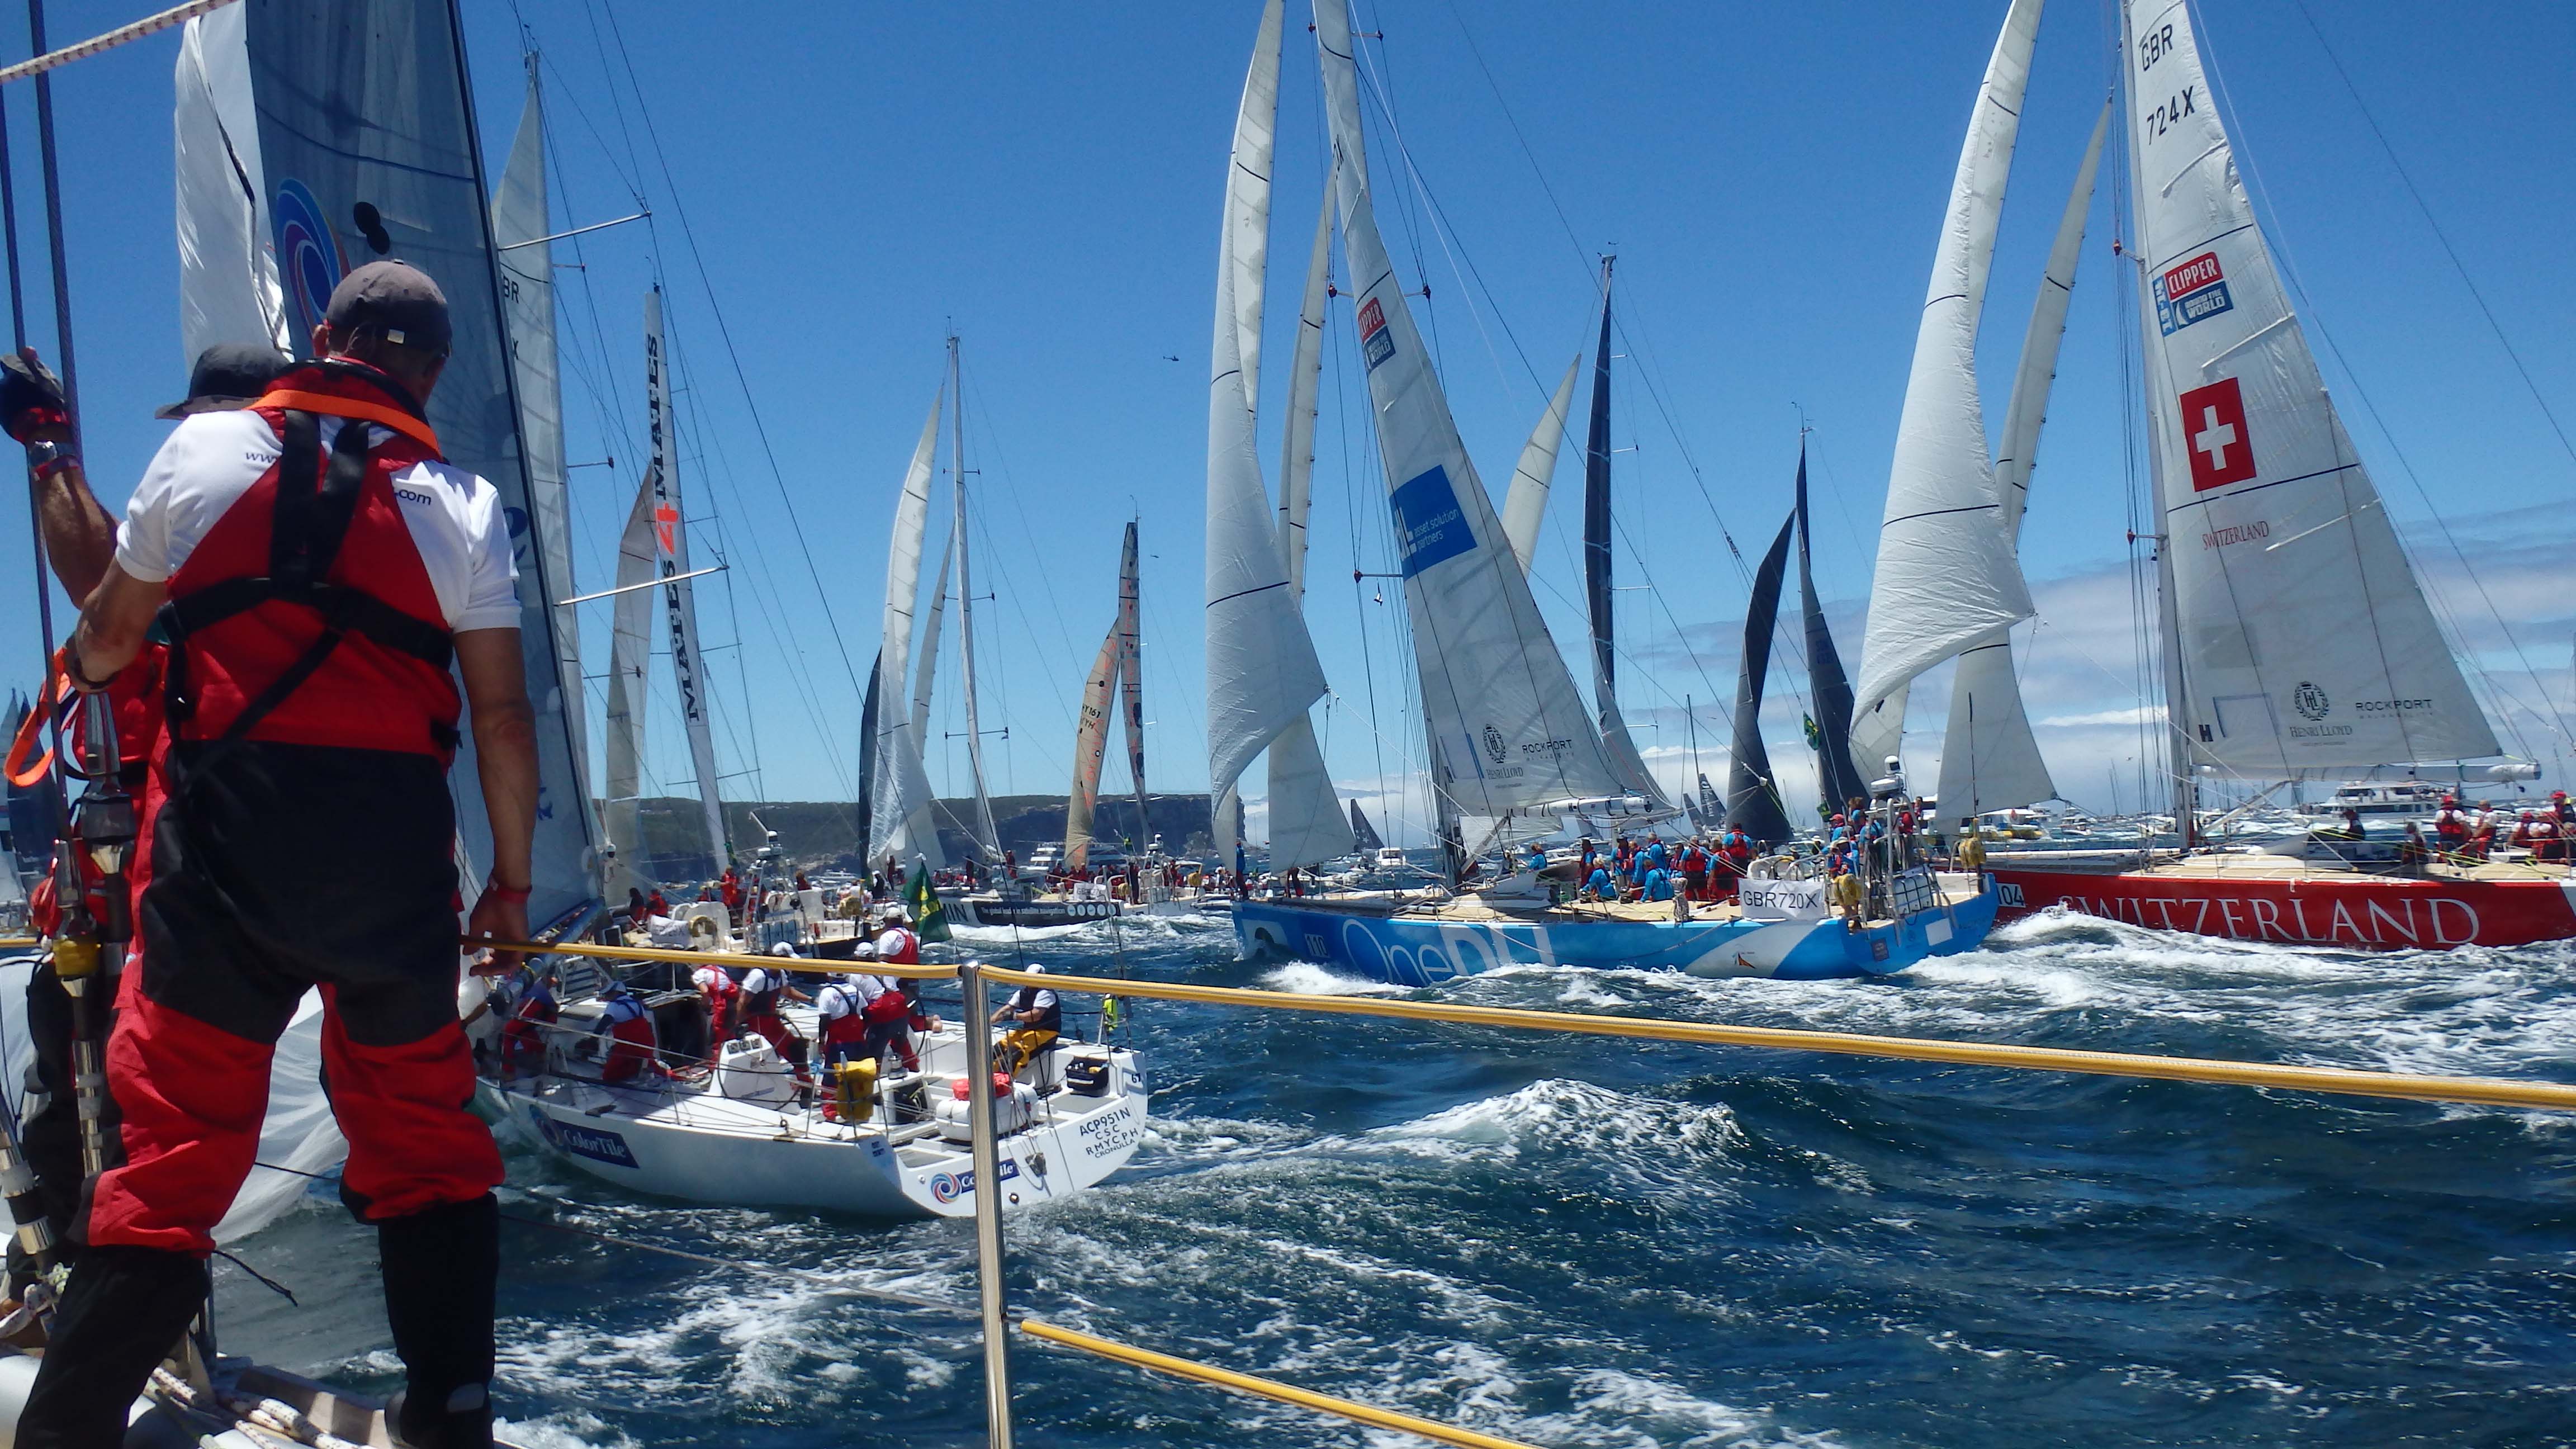 The chance to compete against some of the world’s top sailors in the RSHYR was the highlight for many Clipper Race crew in 2014